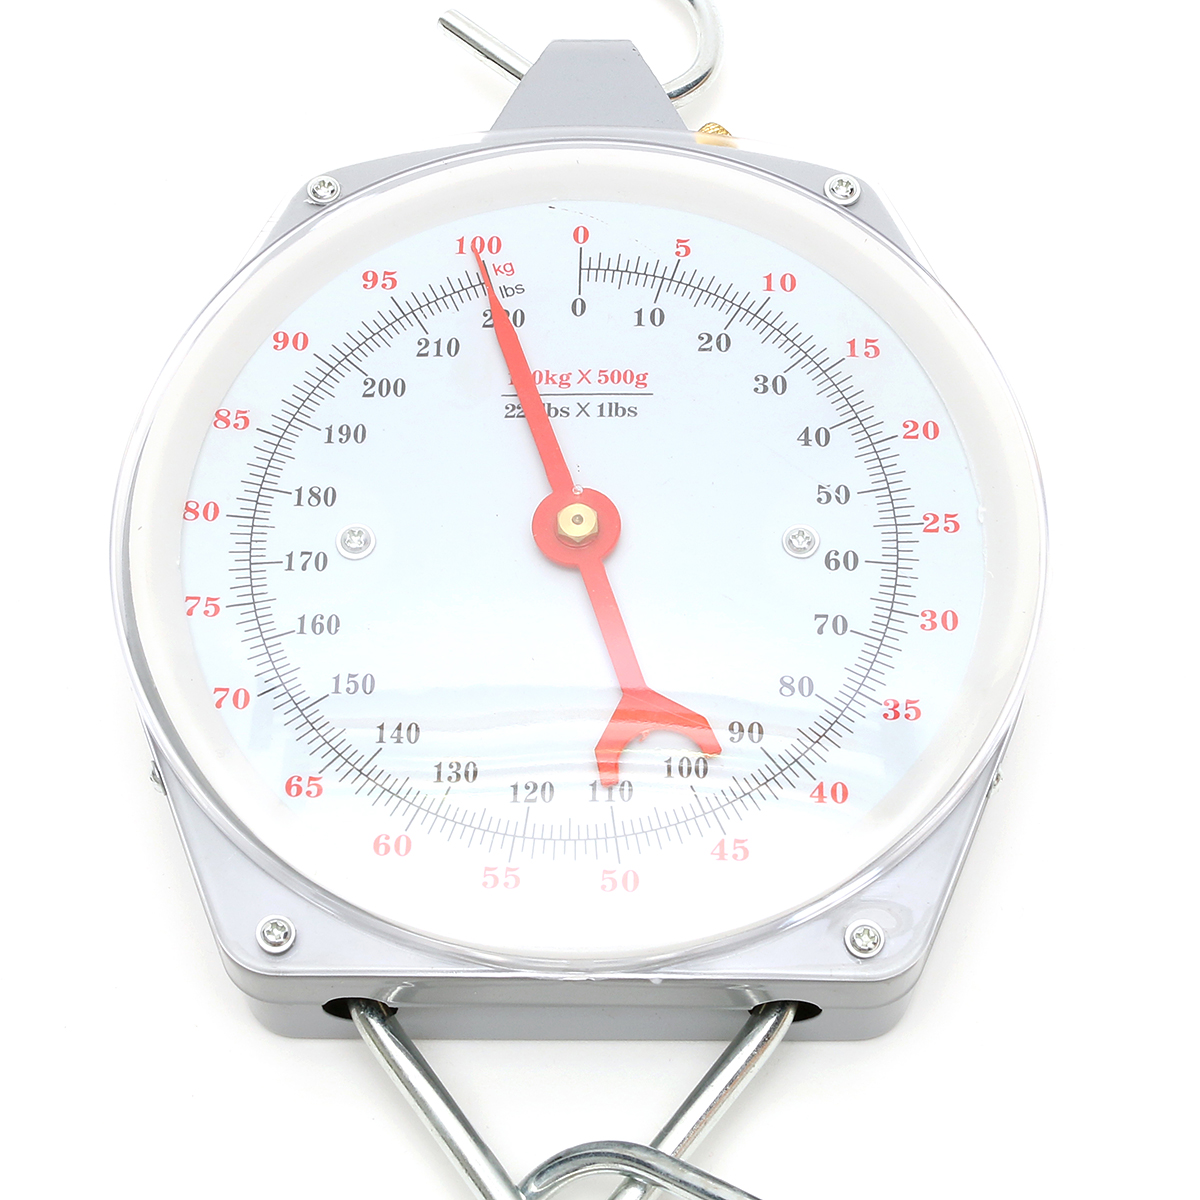 100kg220lbs-Clockface-Hanging-Scale-Weighing-Butchering-with-Hook-1156011-6